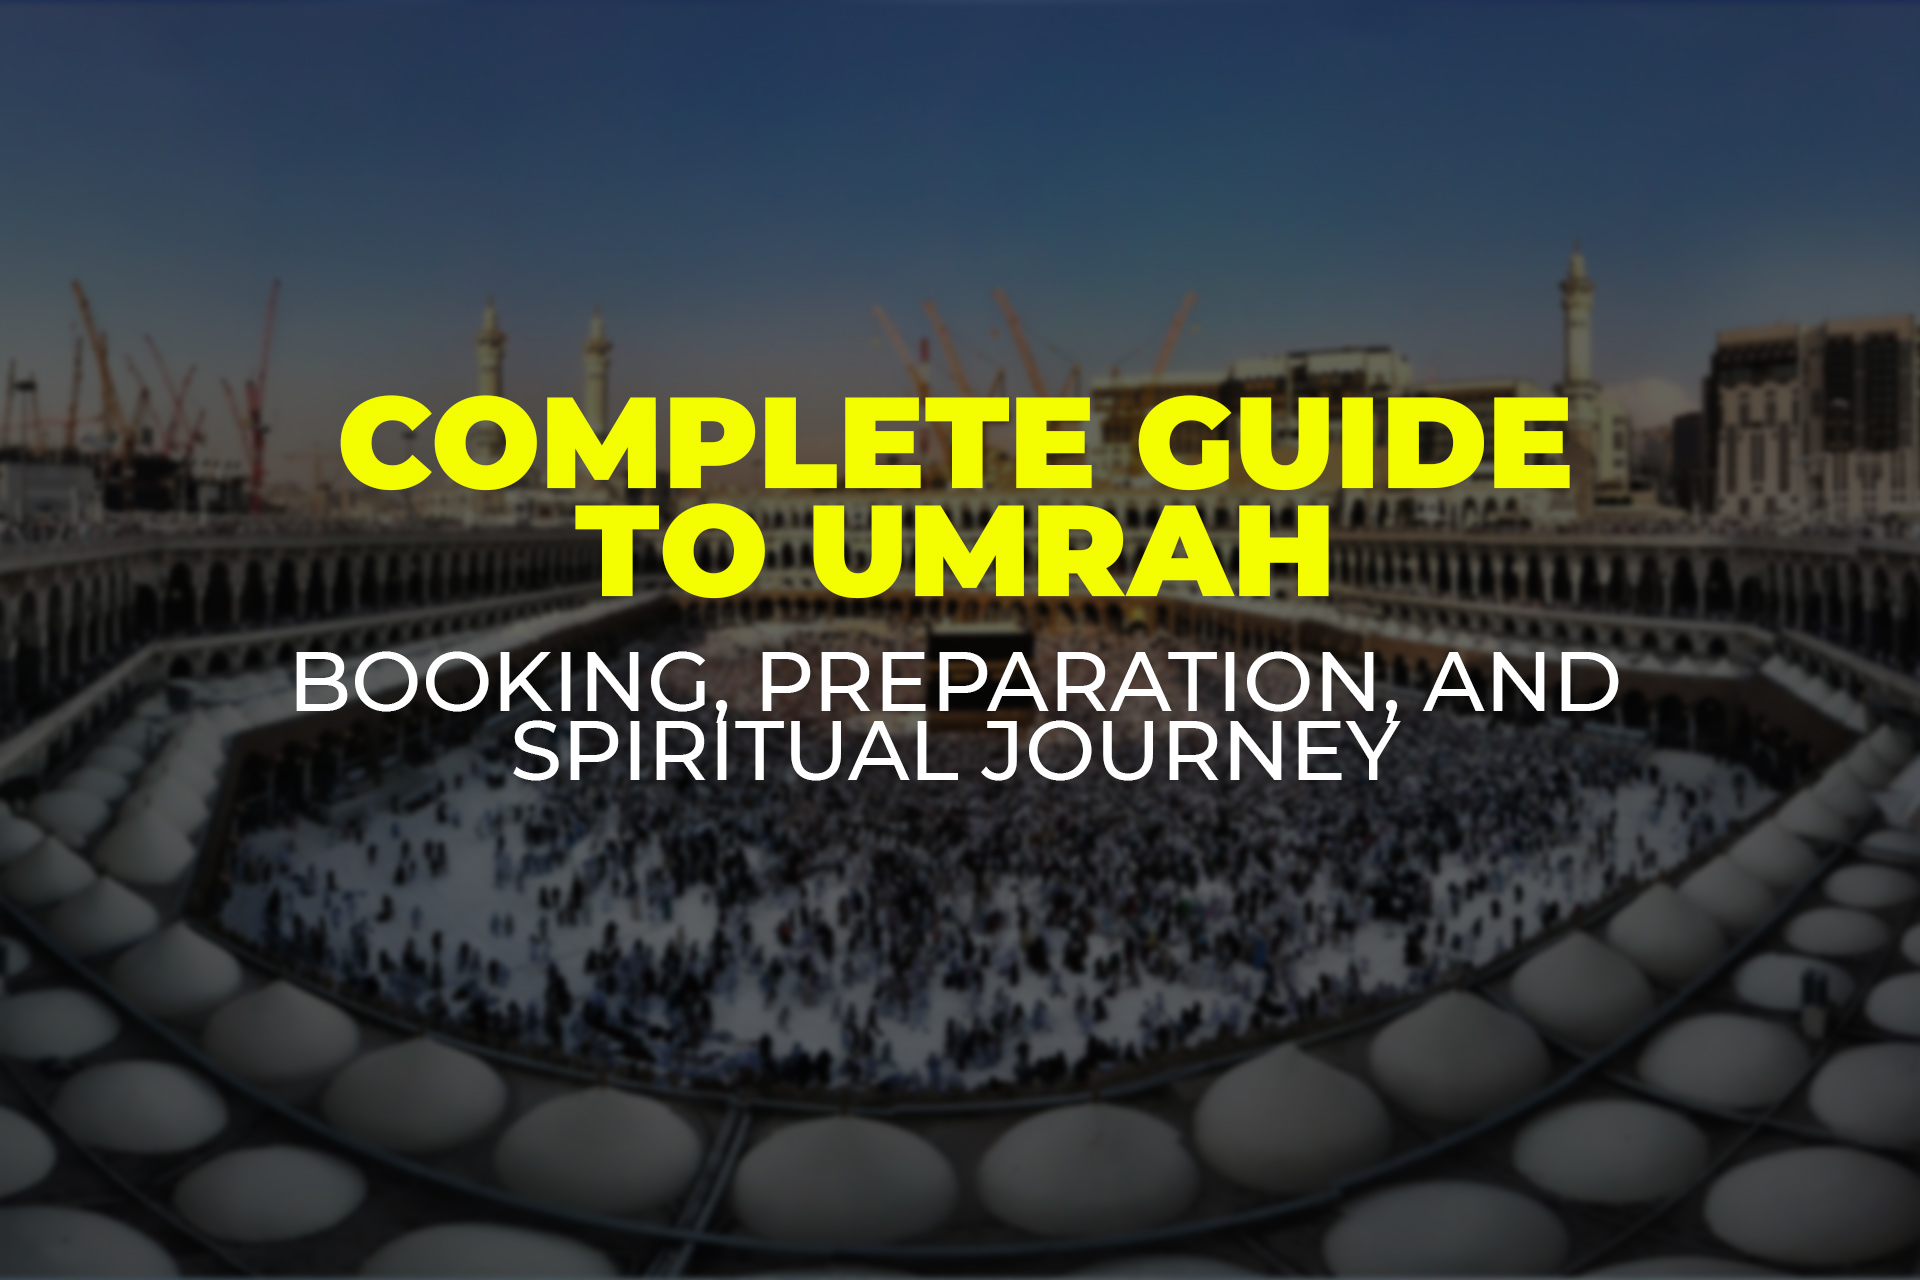 Complete Guide to Umrah: Booking, Preparation, and Spiritual Journey